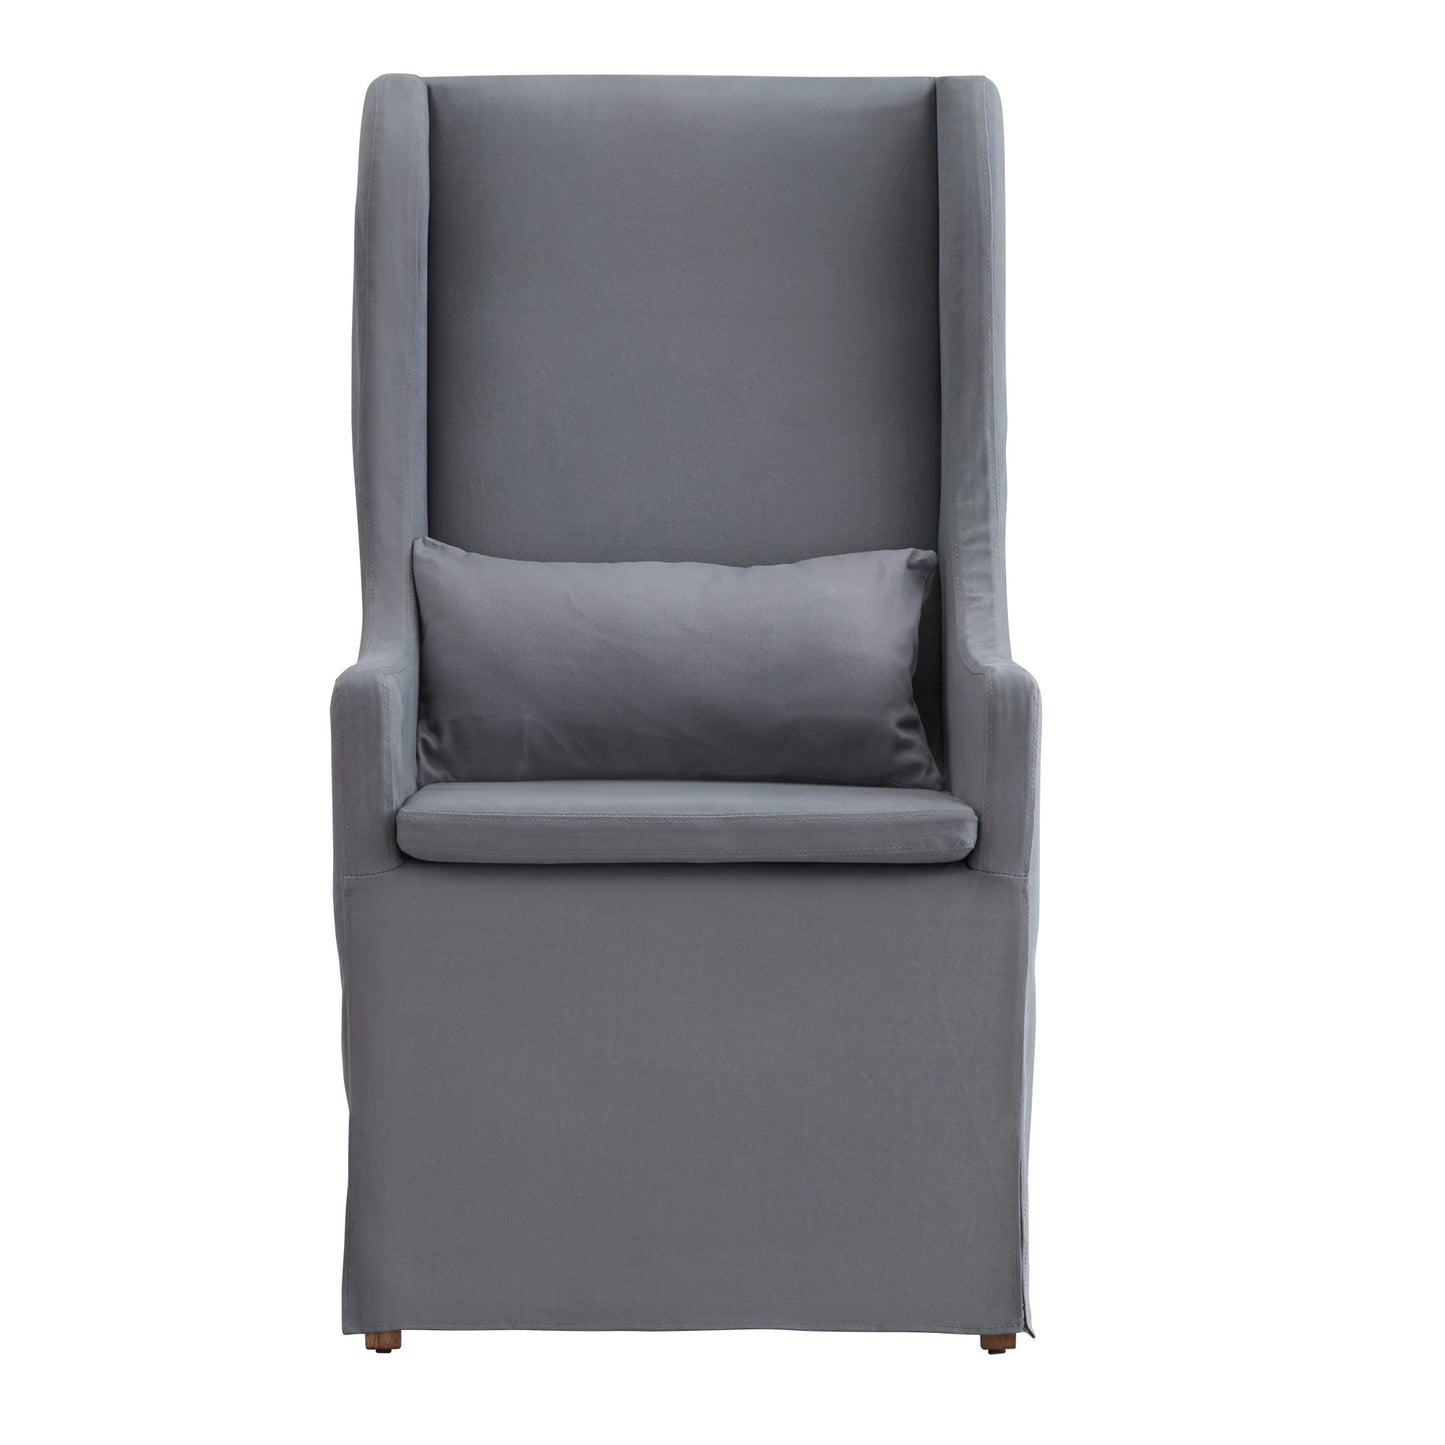 Slipcovered Wingback Parson Chair - Gray